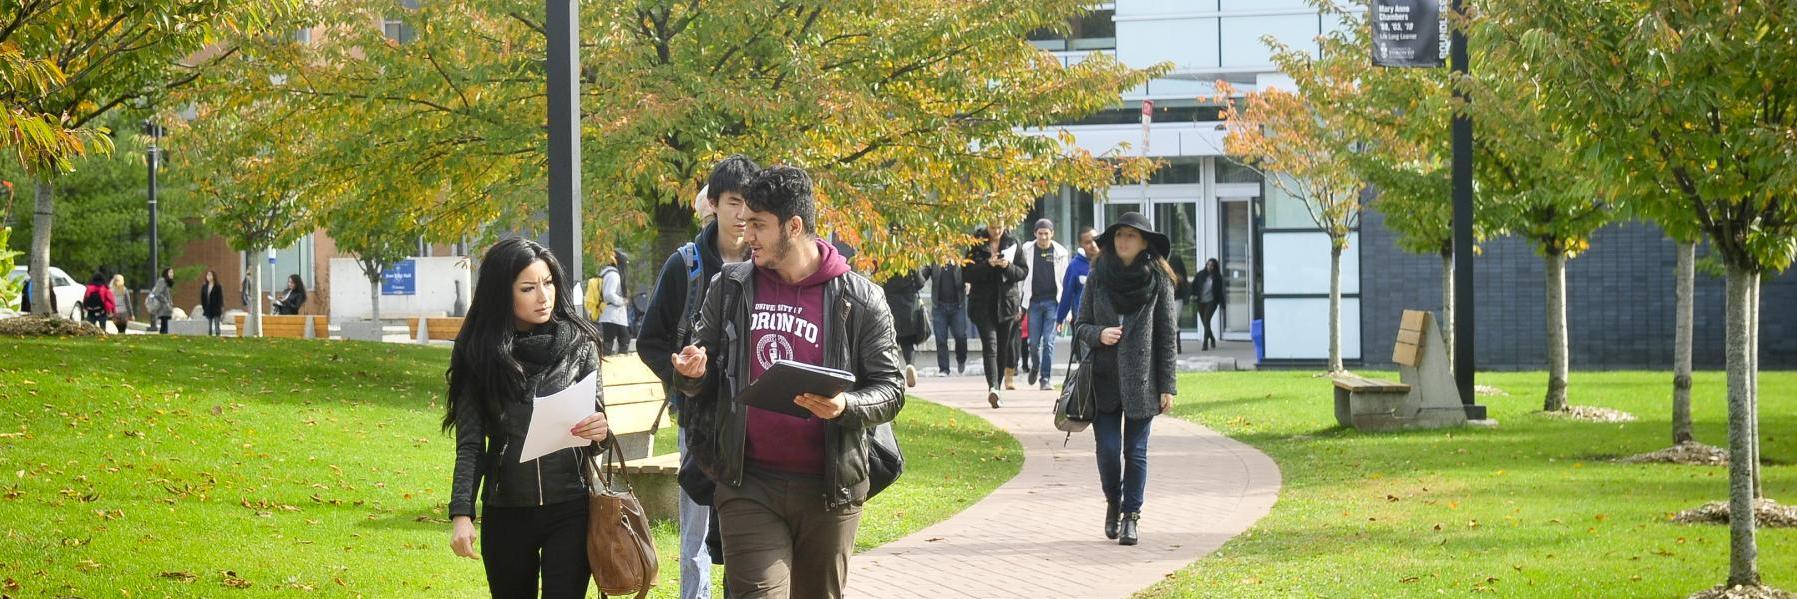 students walking on a path at UTSC